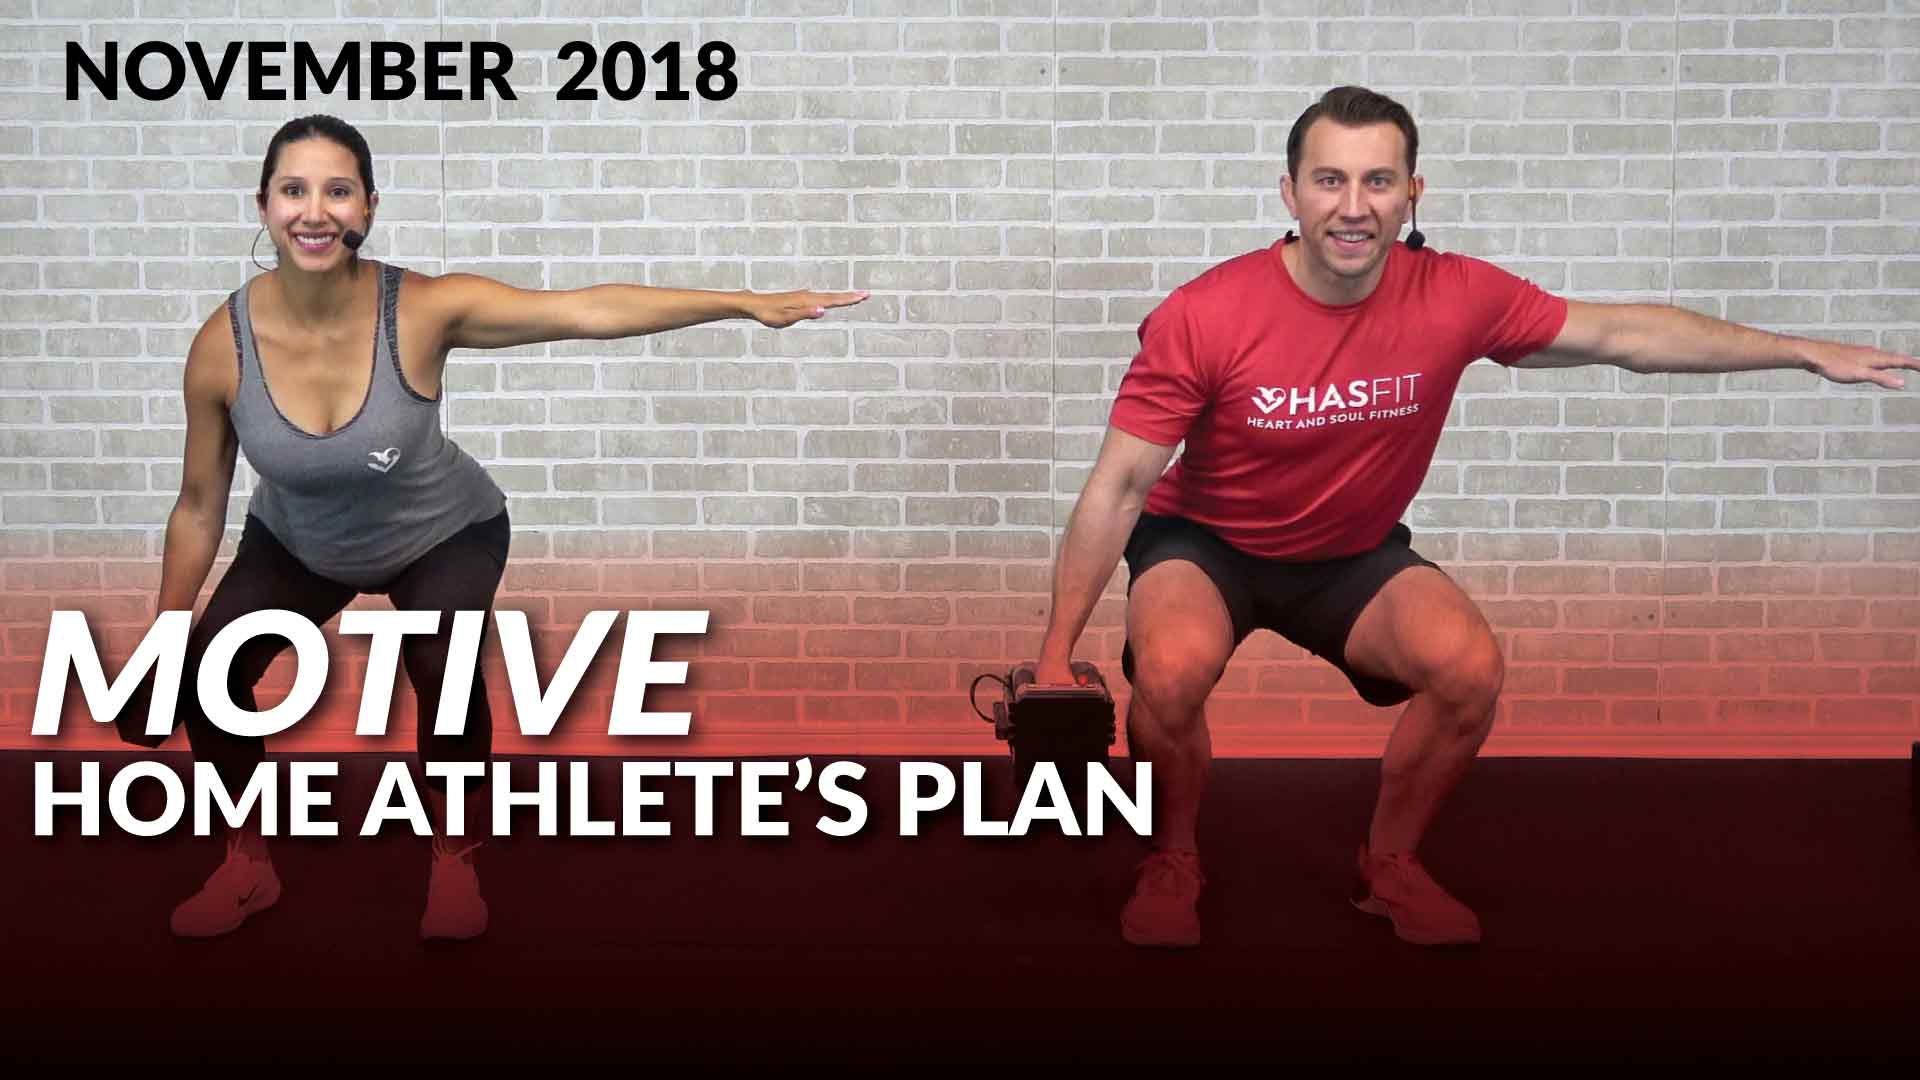 Motive The Home Athlete's Plan HASfit Free Full Length Workout